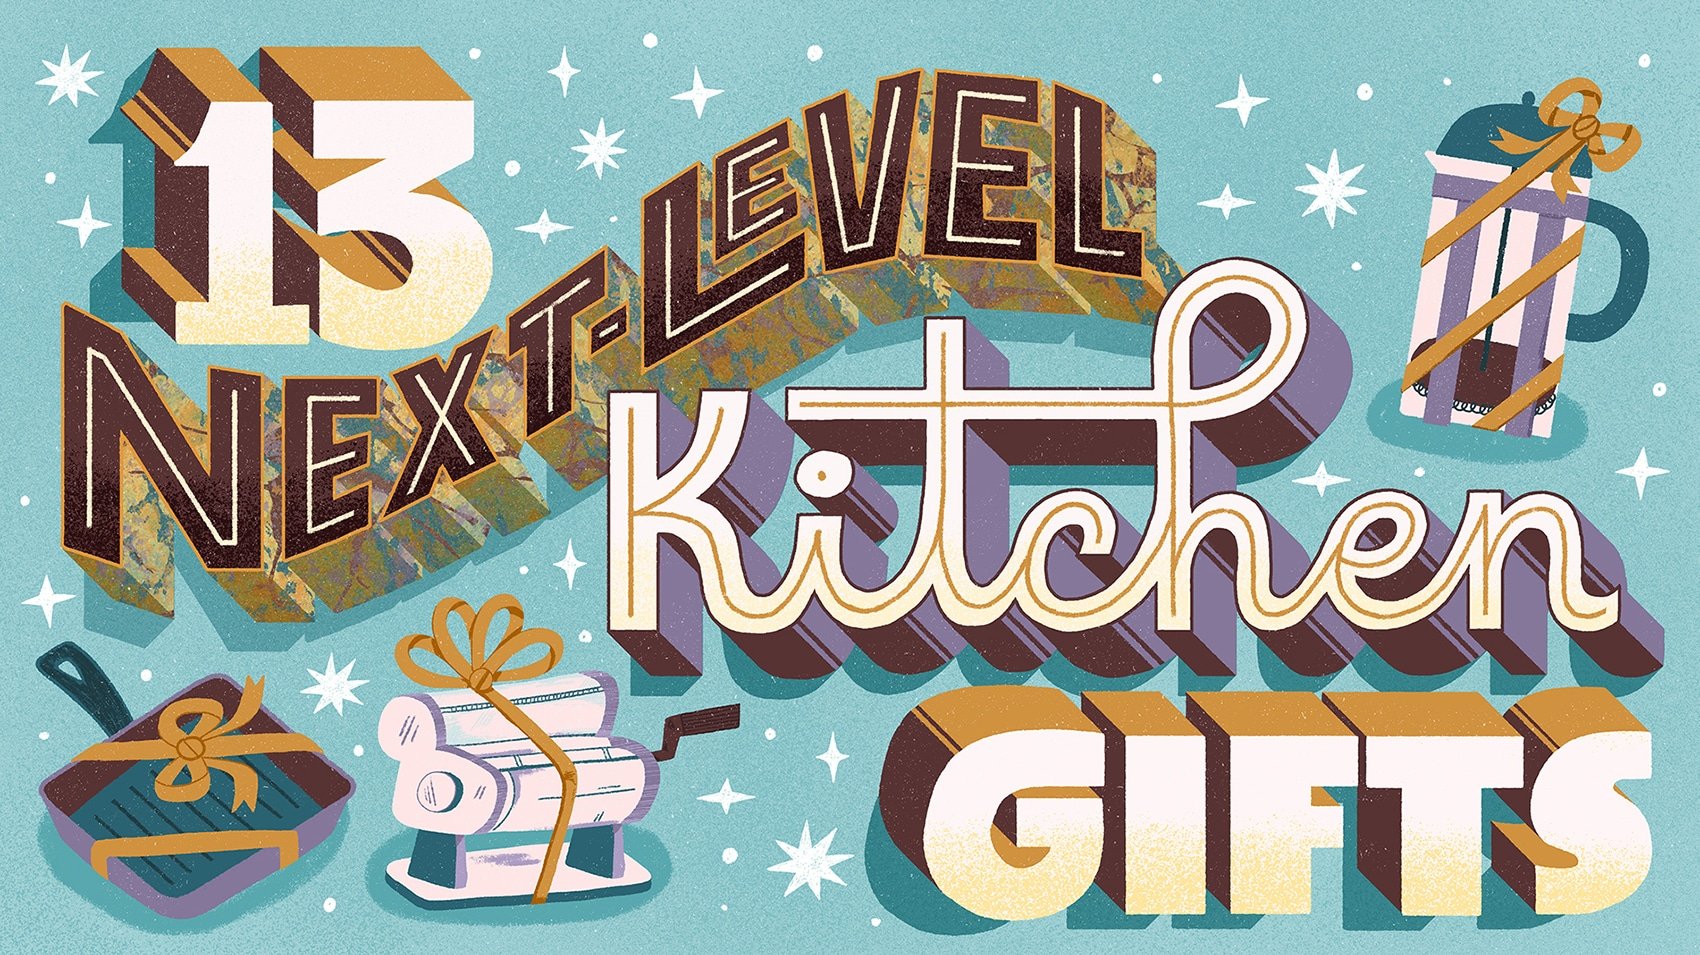 13 next-level kitchen gifts for people who love to cook